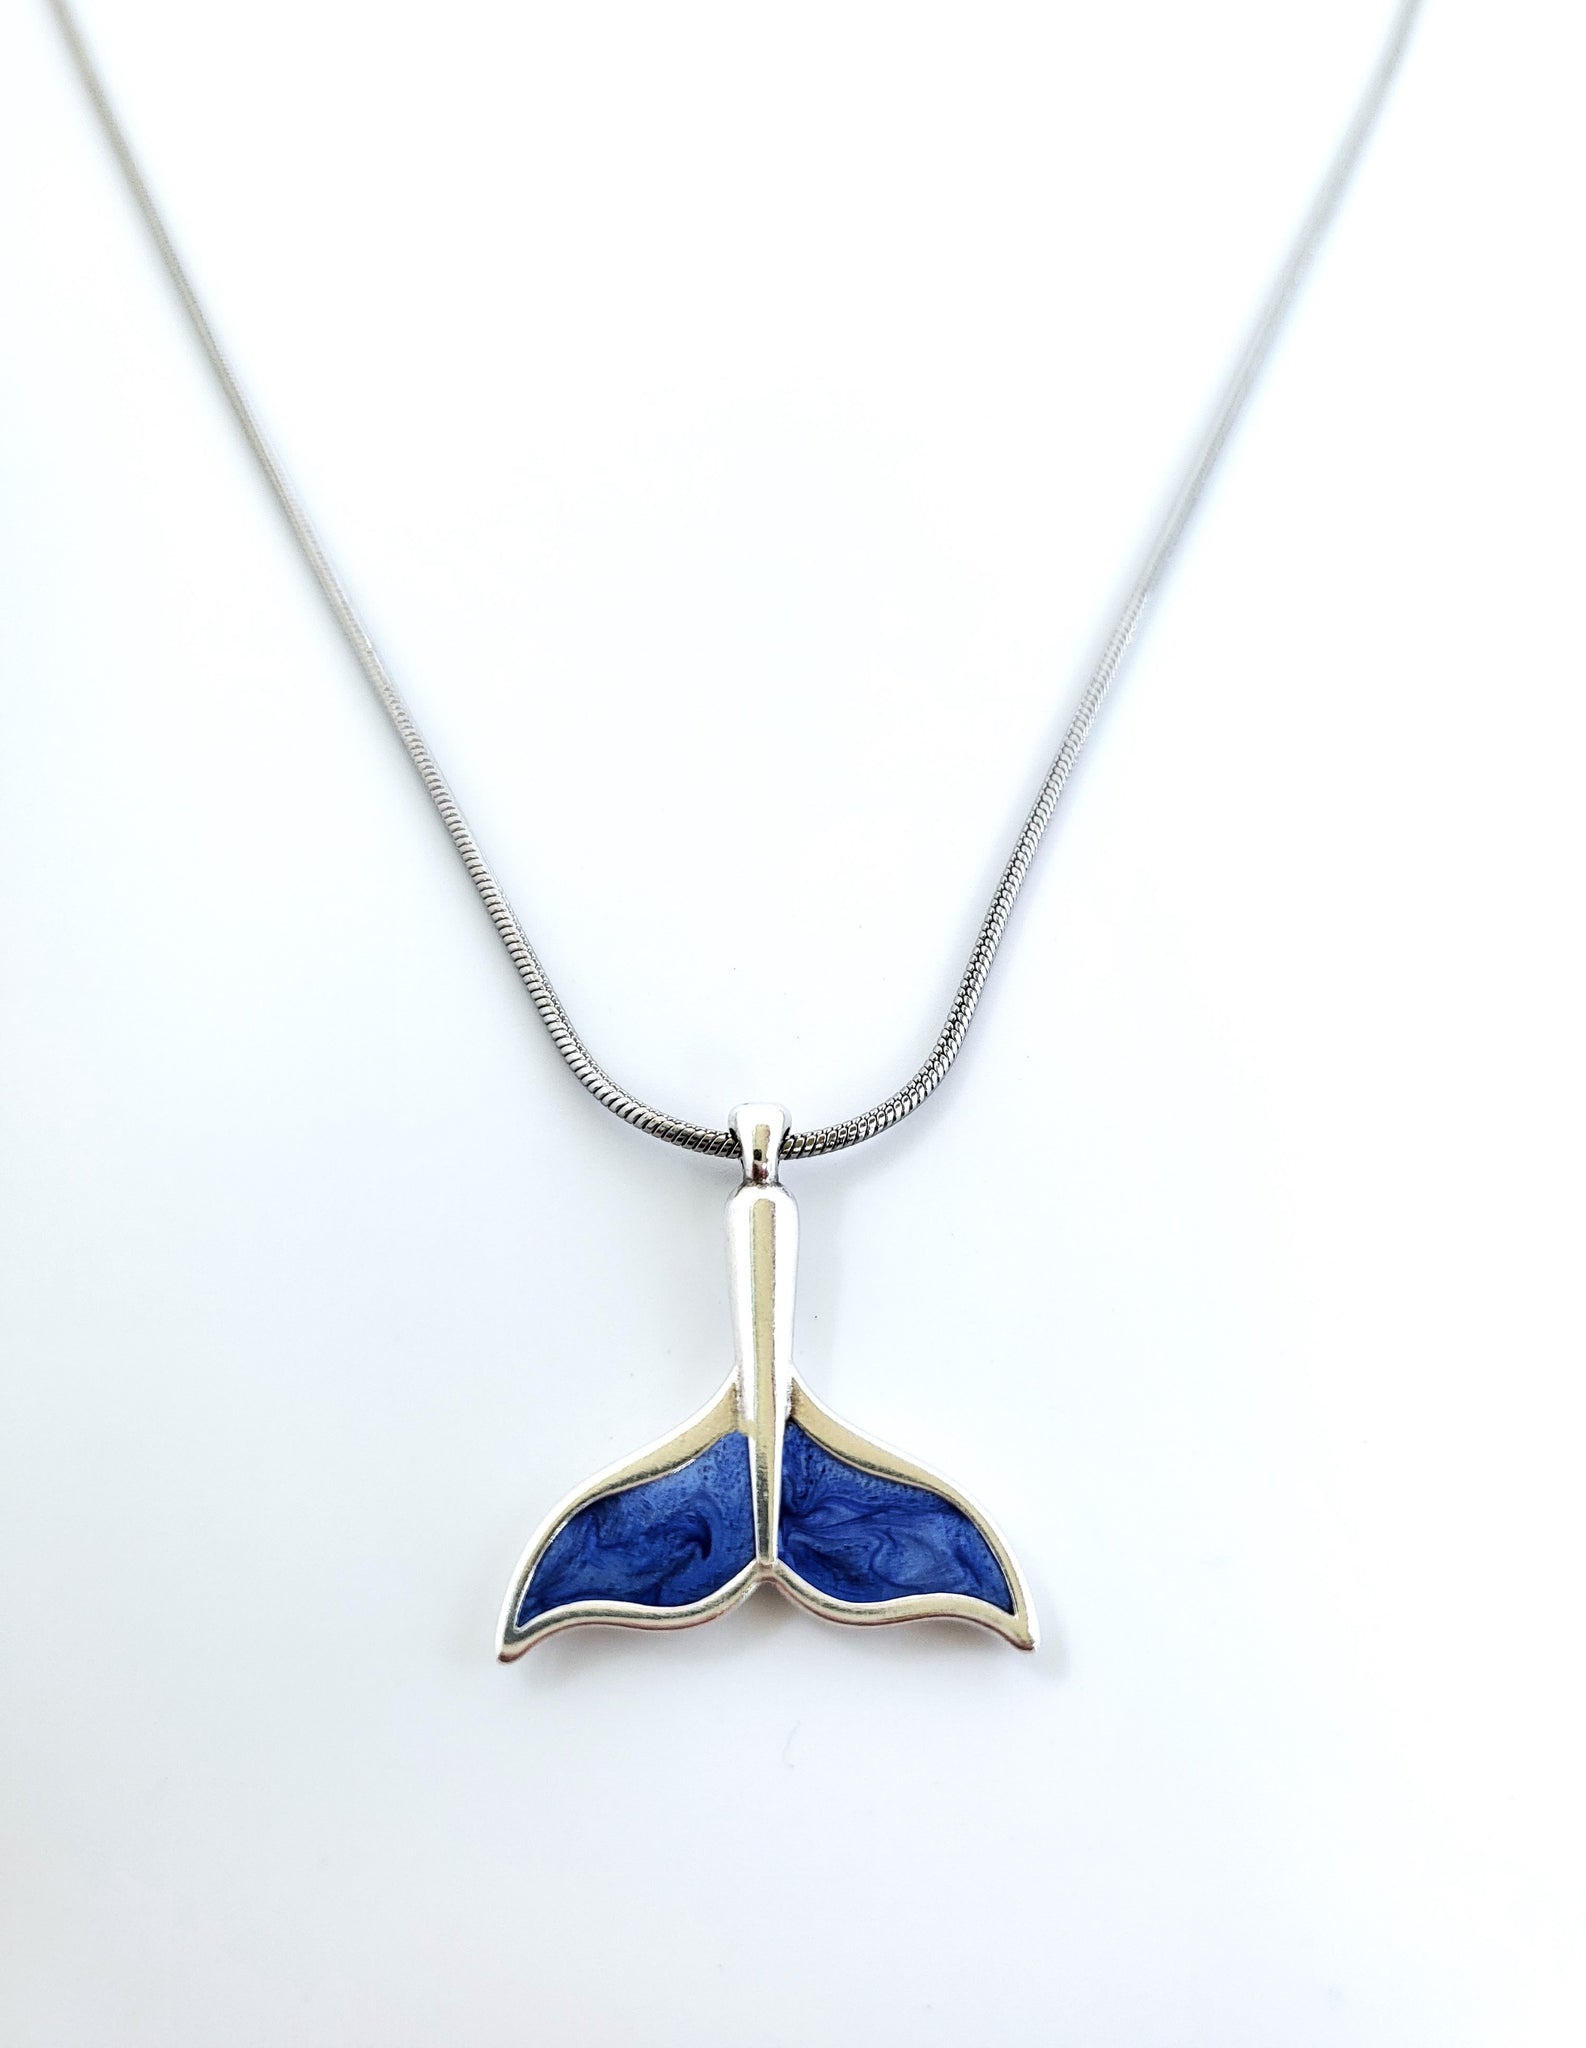 Necklace tail of whale